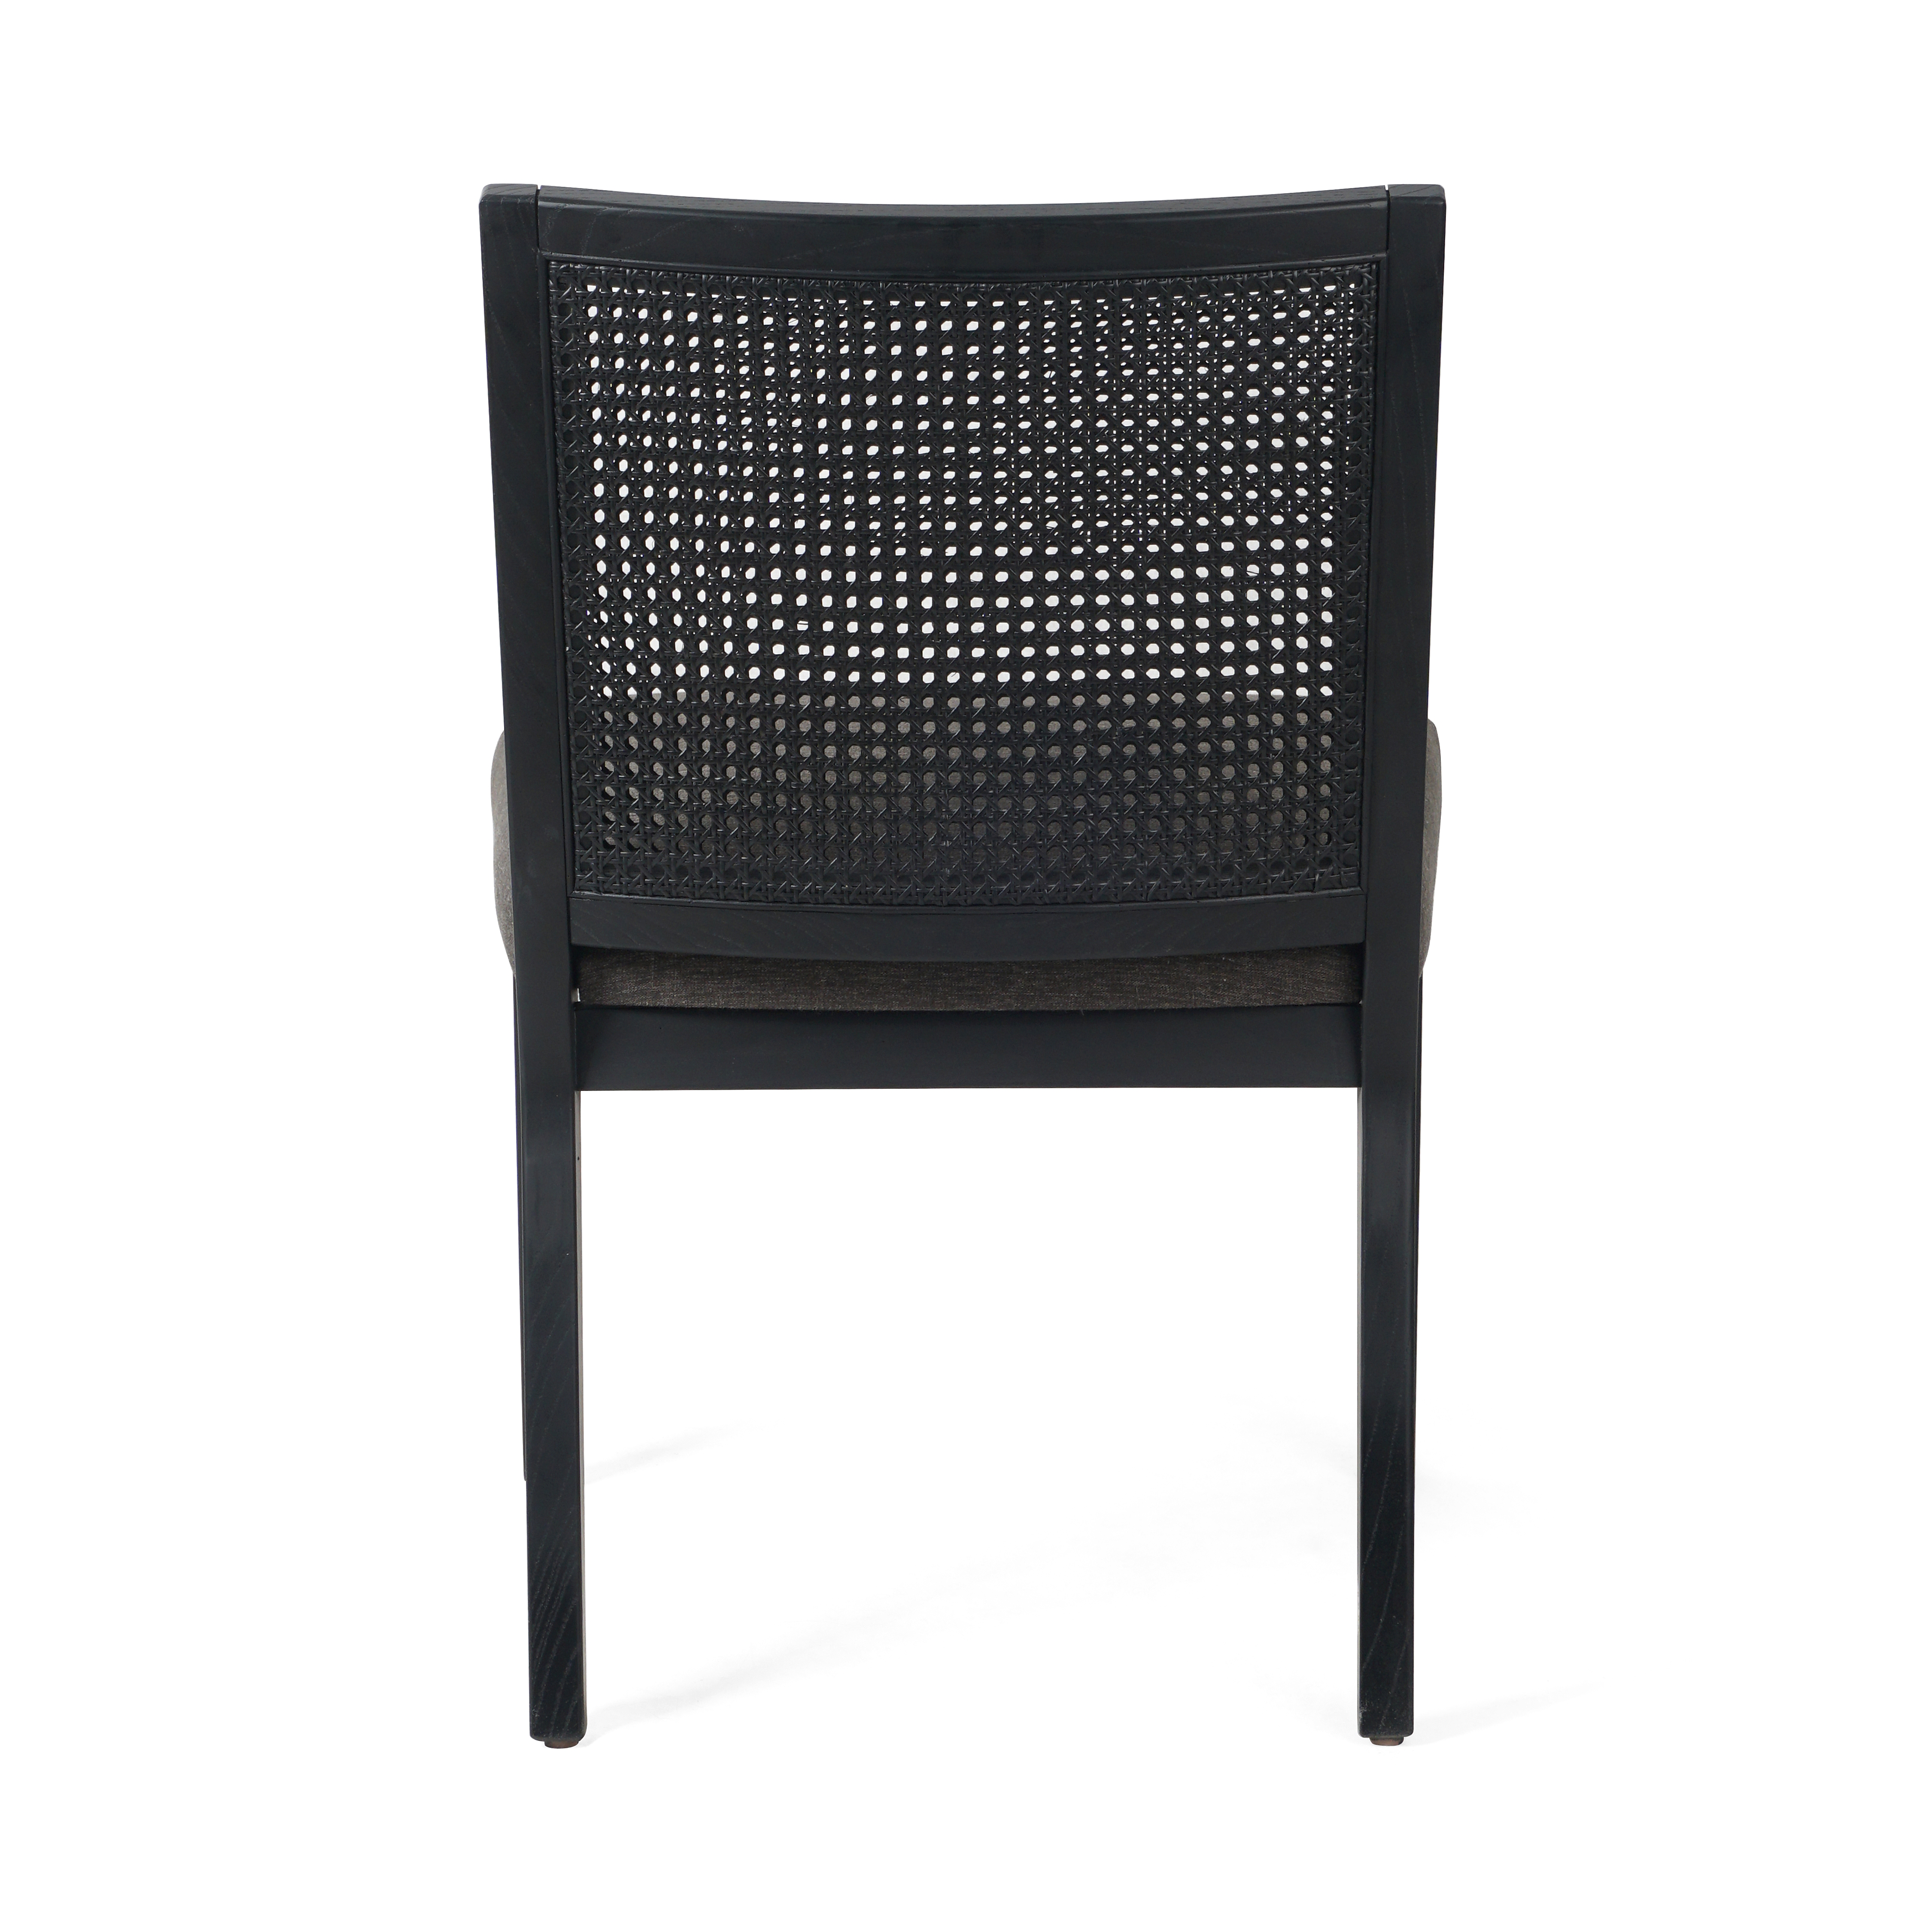 Antonia Armless Dining Chair-Charcl - Image 4